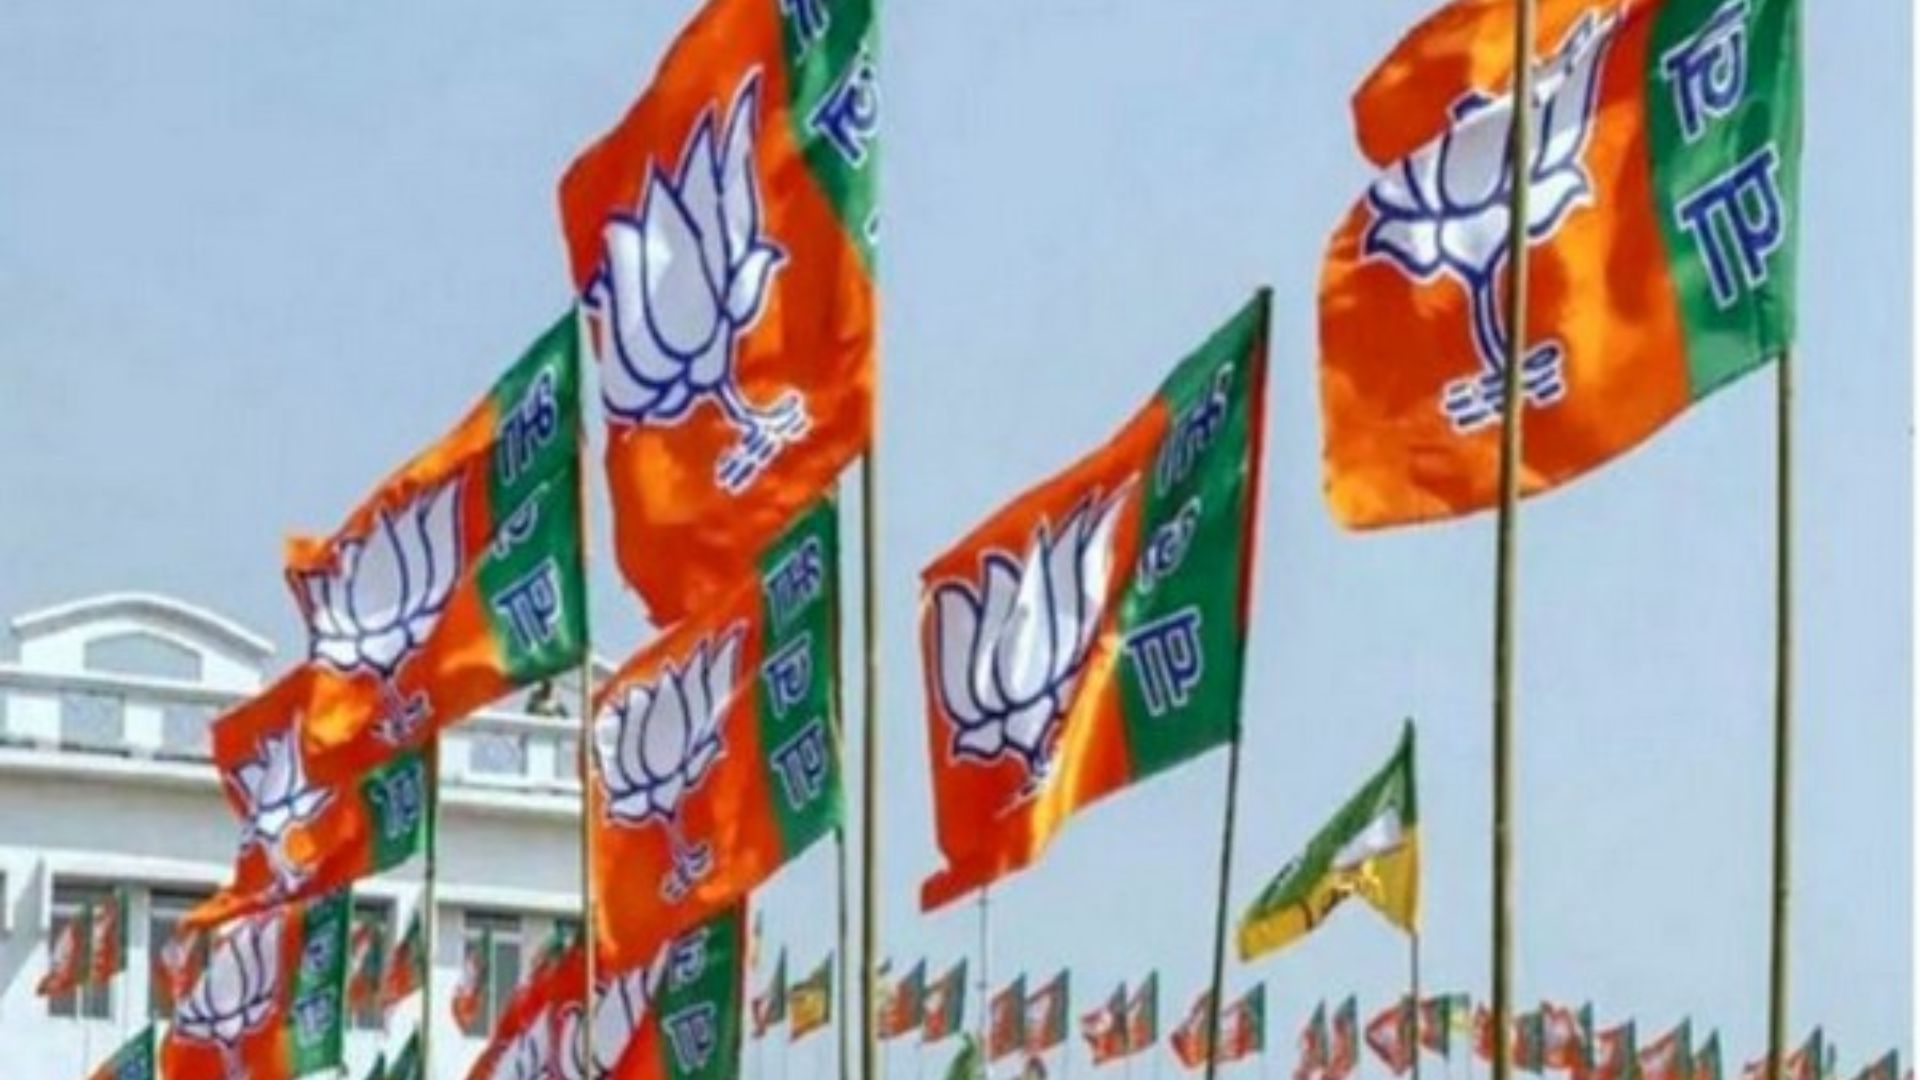 BJP Gears Up for LS Polls with Intensive ‘Gram Parikrama Yatra’ Aimed at Farmer Outreach